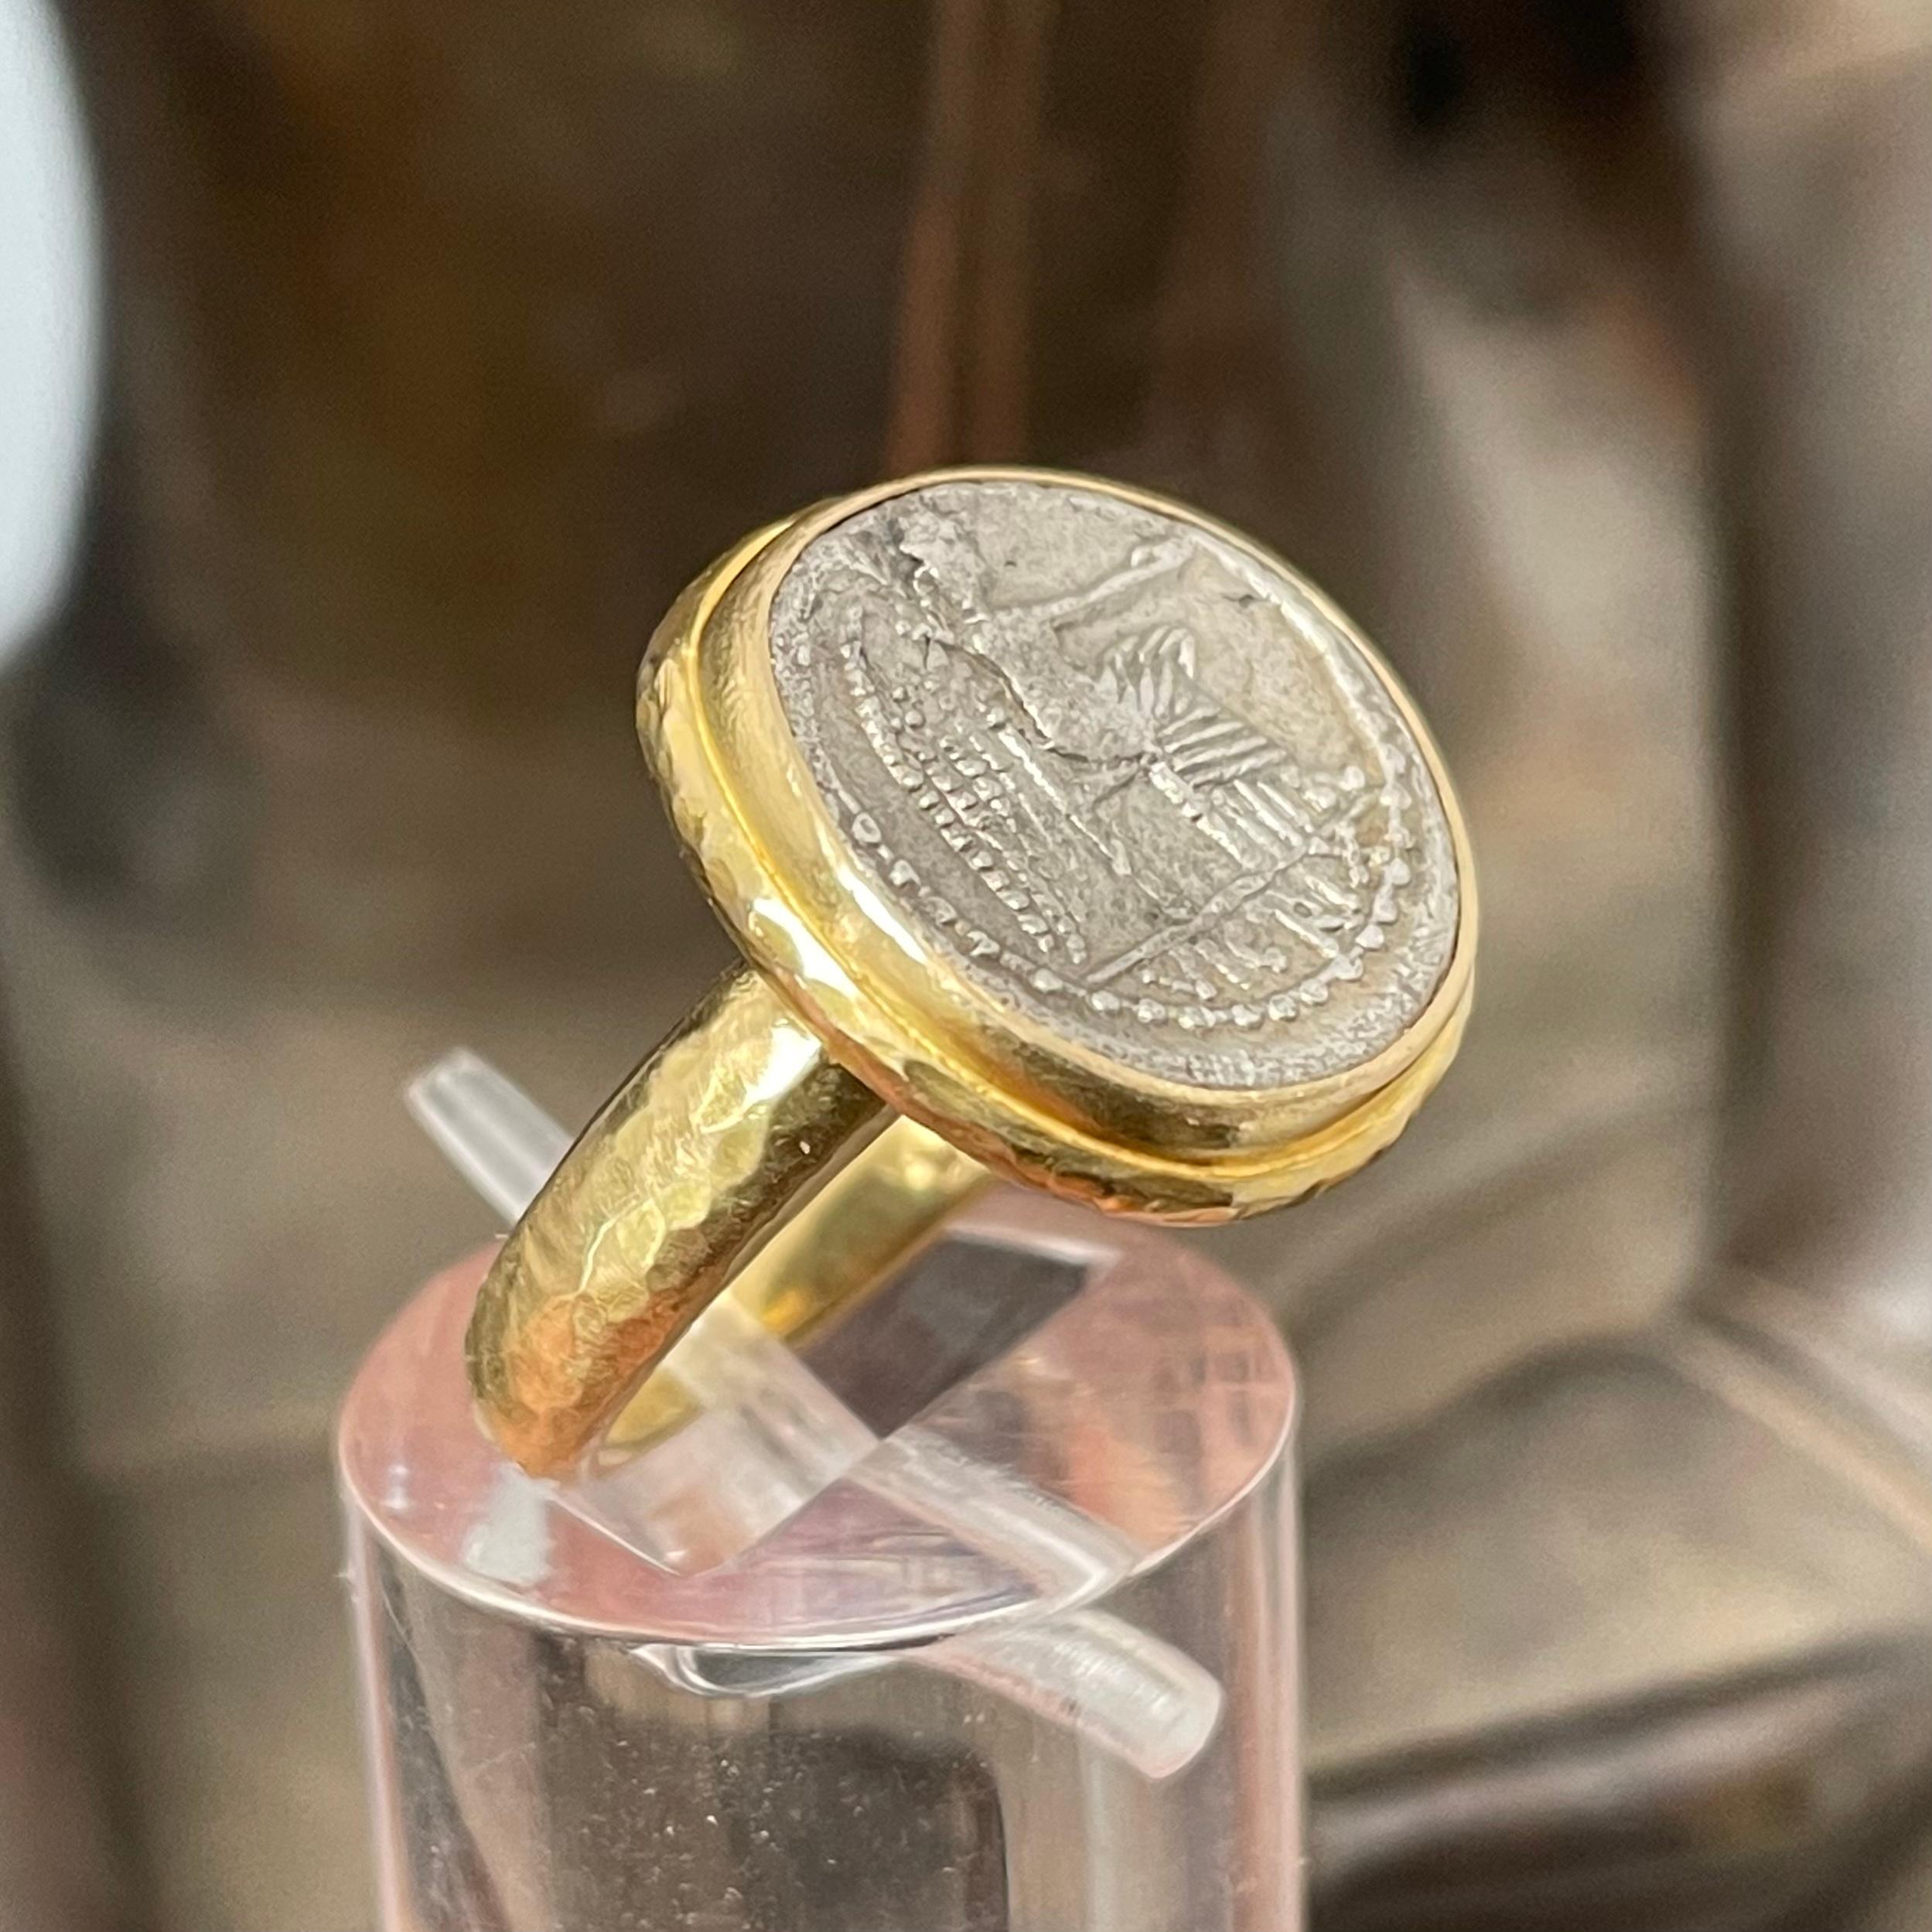 A beautiful authentic silver quinarius coin from the Roman Republic 89 BC, is set simply with a hammered bezel and hammered graduated shank in this ancient-inspired Steven Battelle ring design.  This coin depicts victory seated, holding a patera